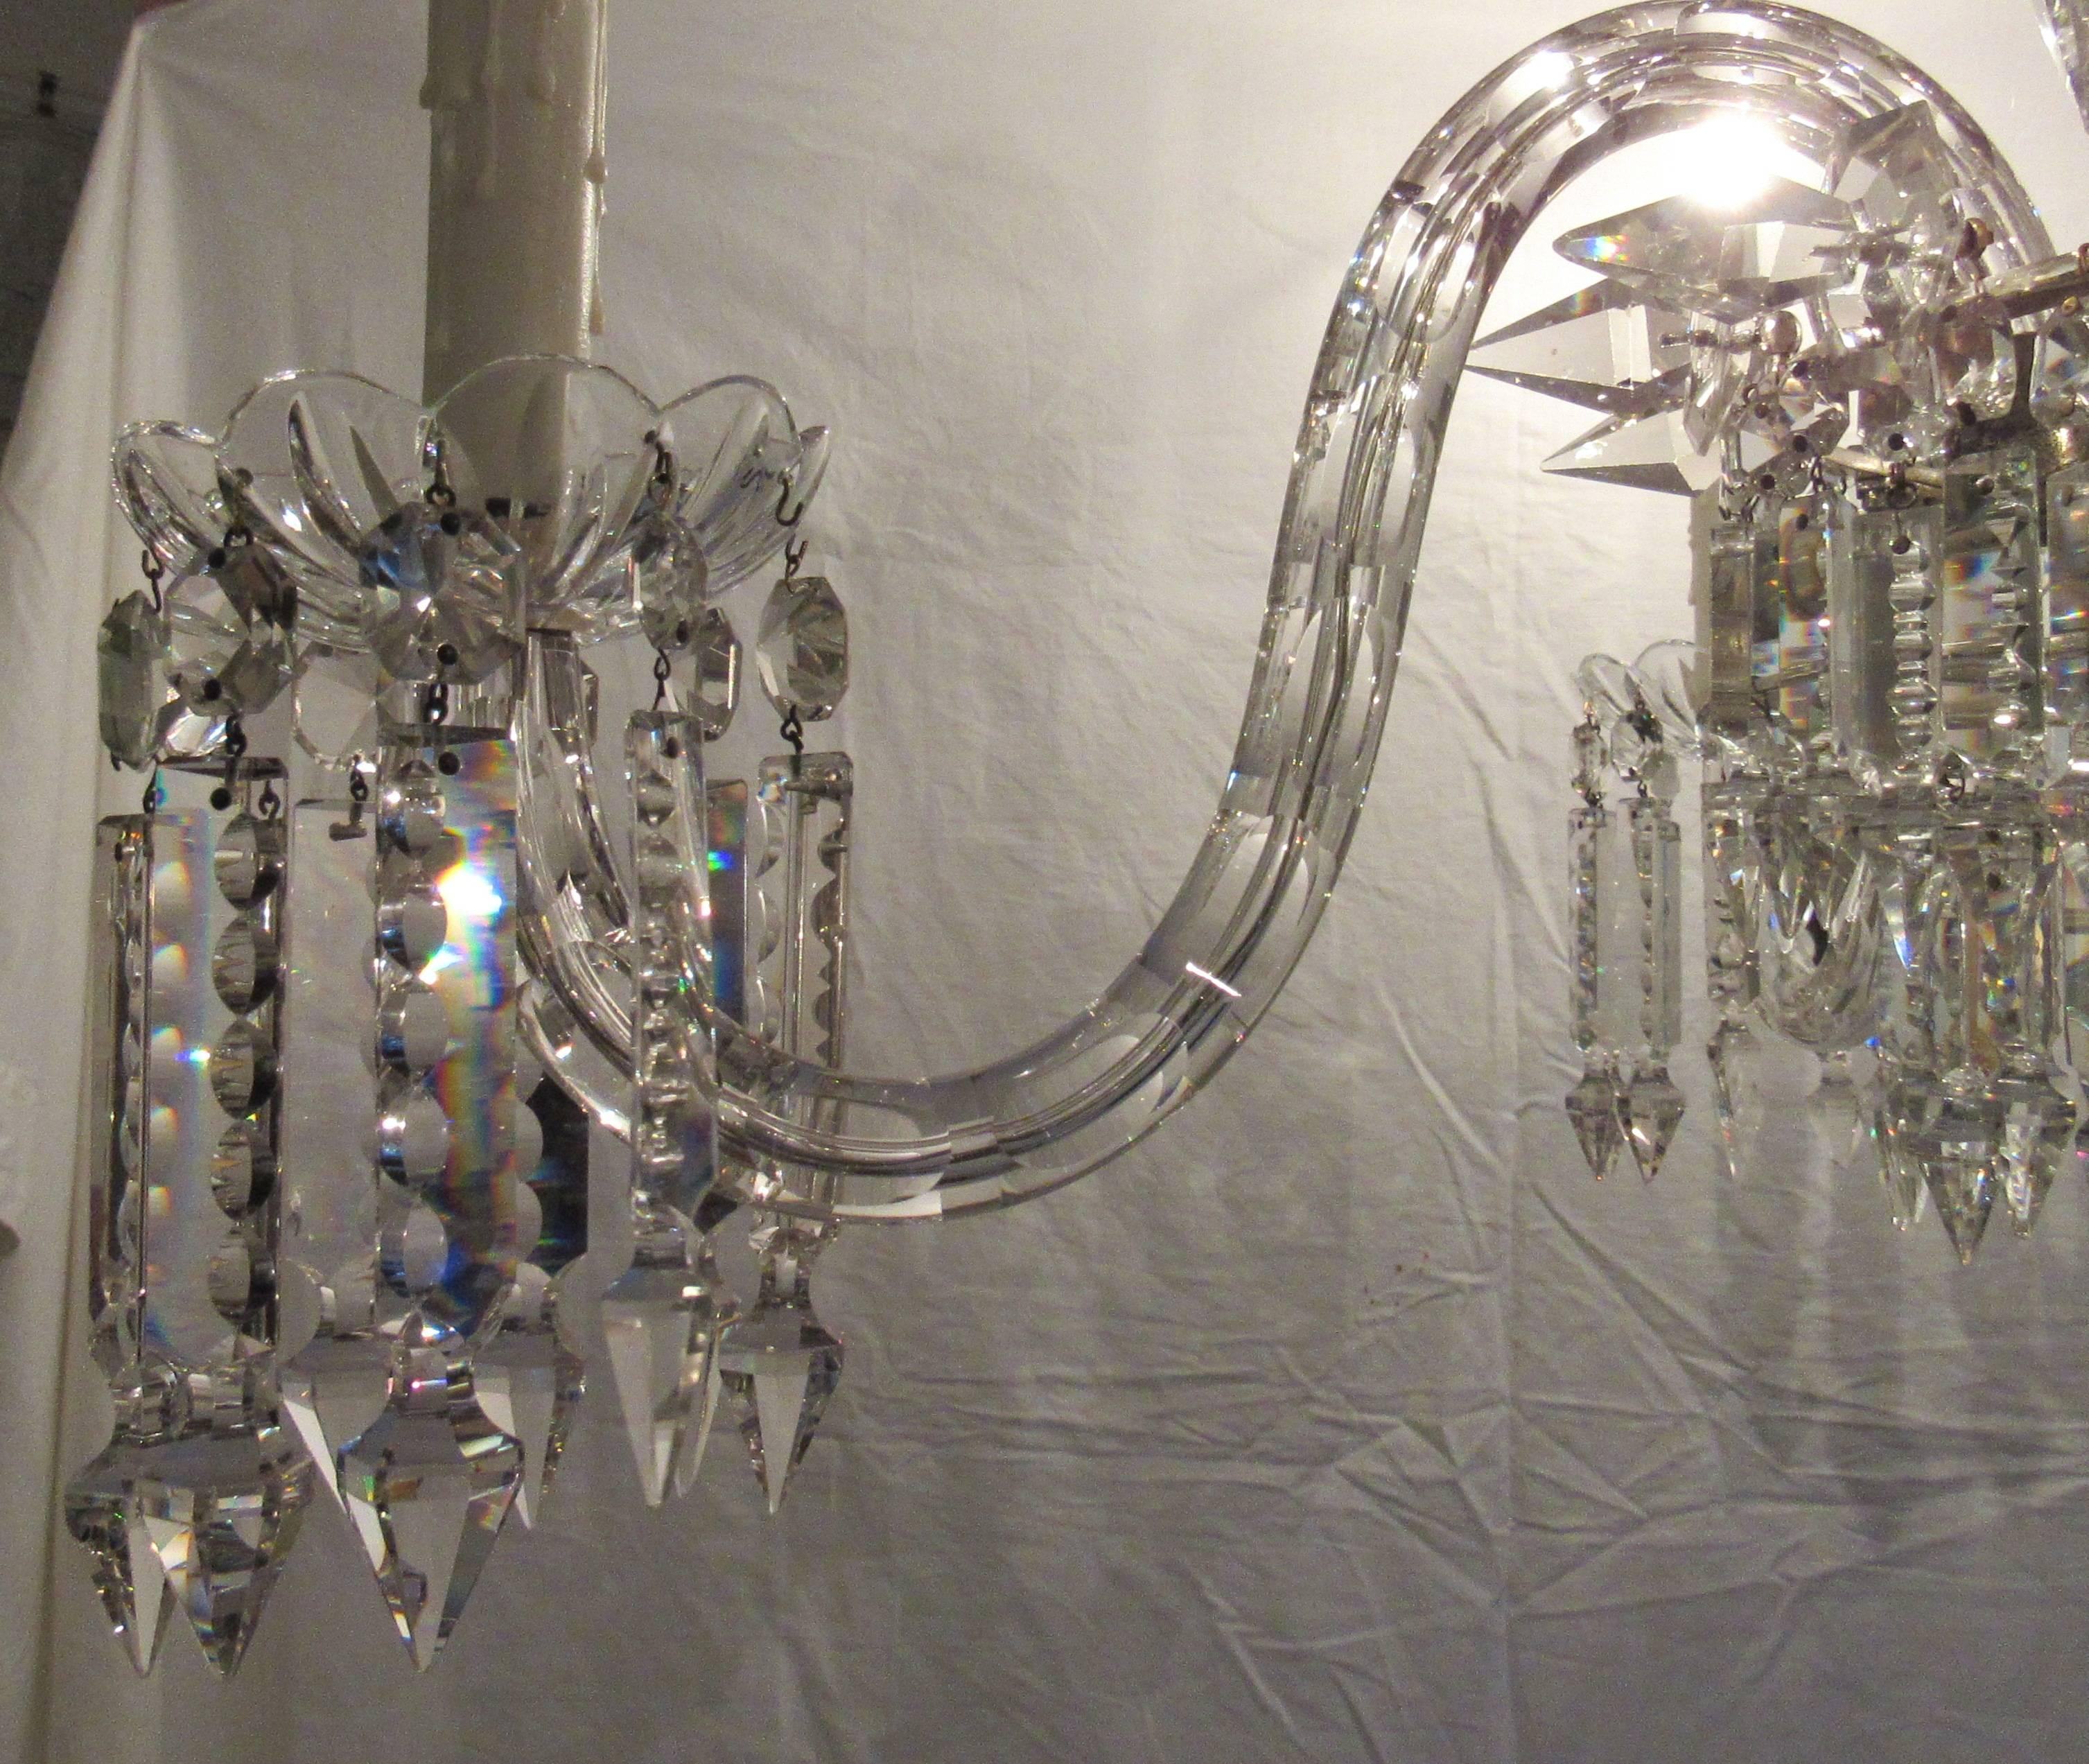 Gorgeous European crystal chandelier, early 20th century. 

Two sections of hanging prisms down to the center basket with three graduating rings of prisms with center ball top accented with crystal spears. Four cut-glass arms with hanging